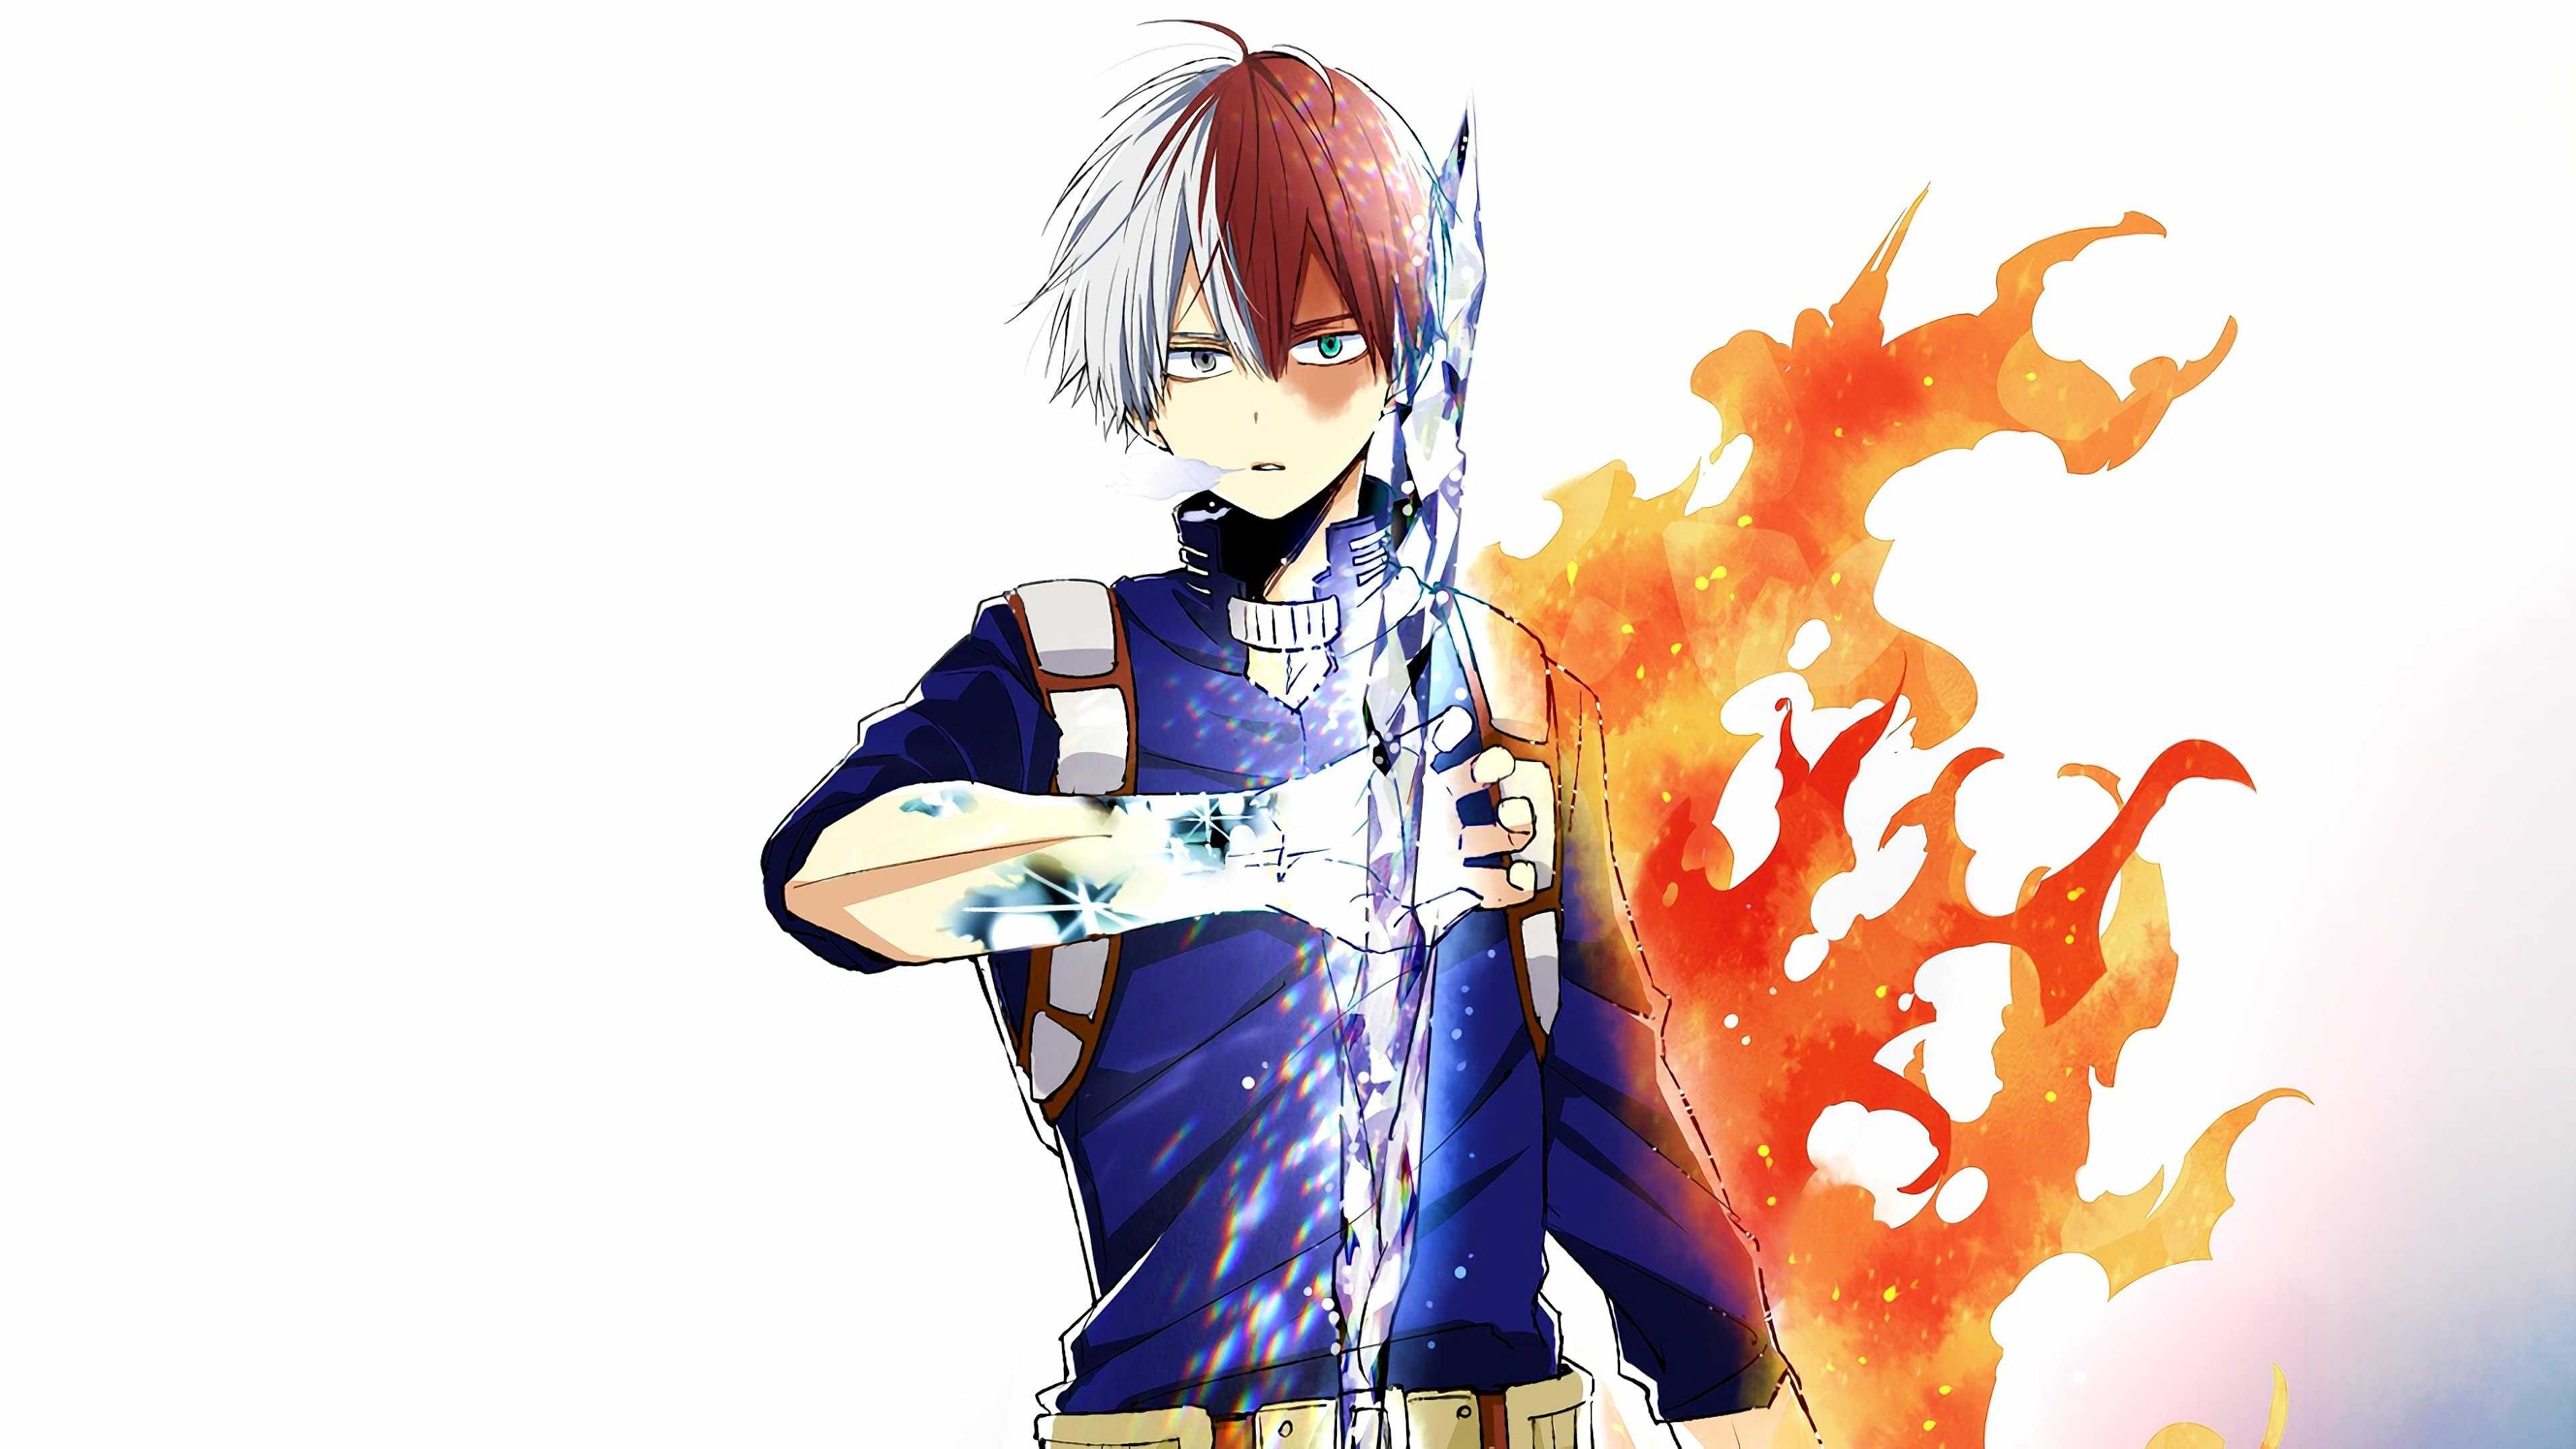 Anime wallpaper of a boy with fire in the background - My Hero Academia, ice